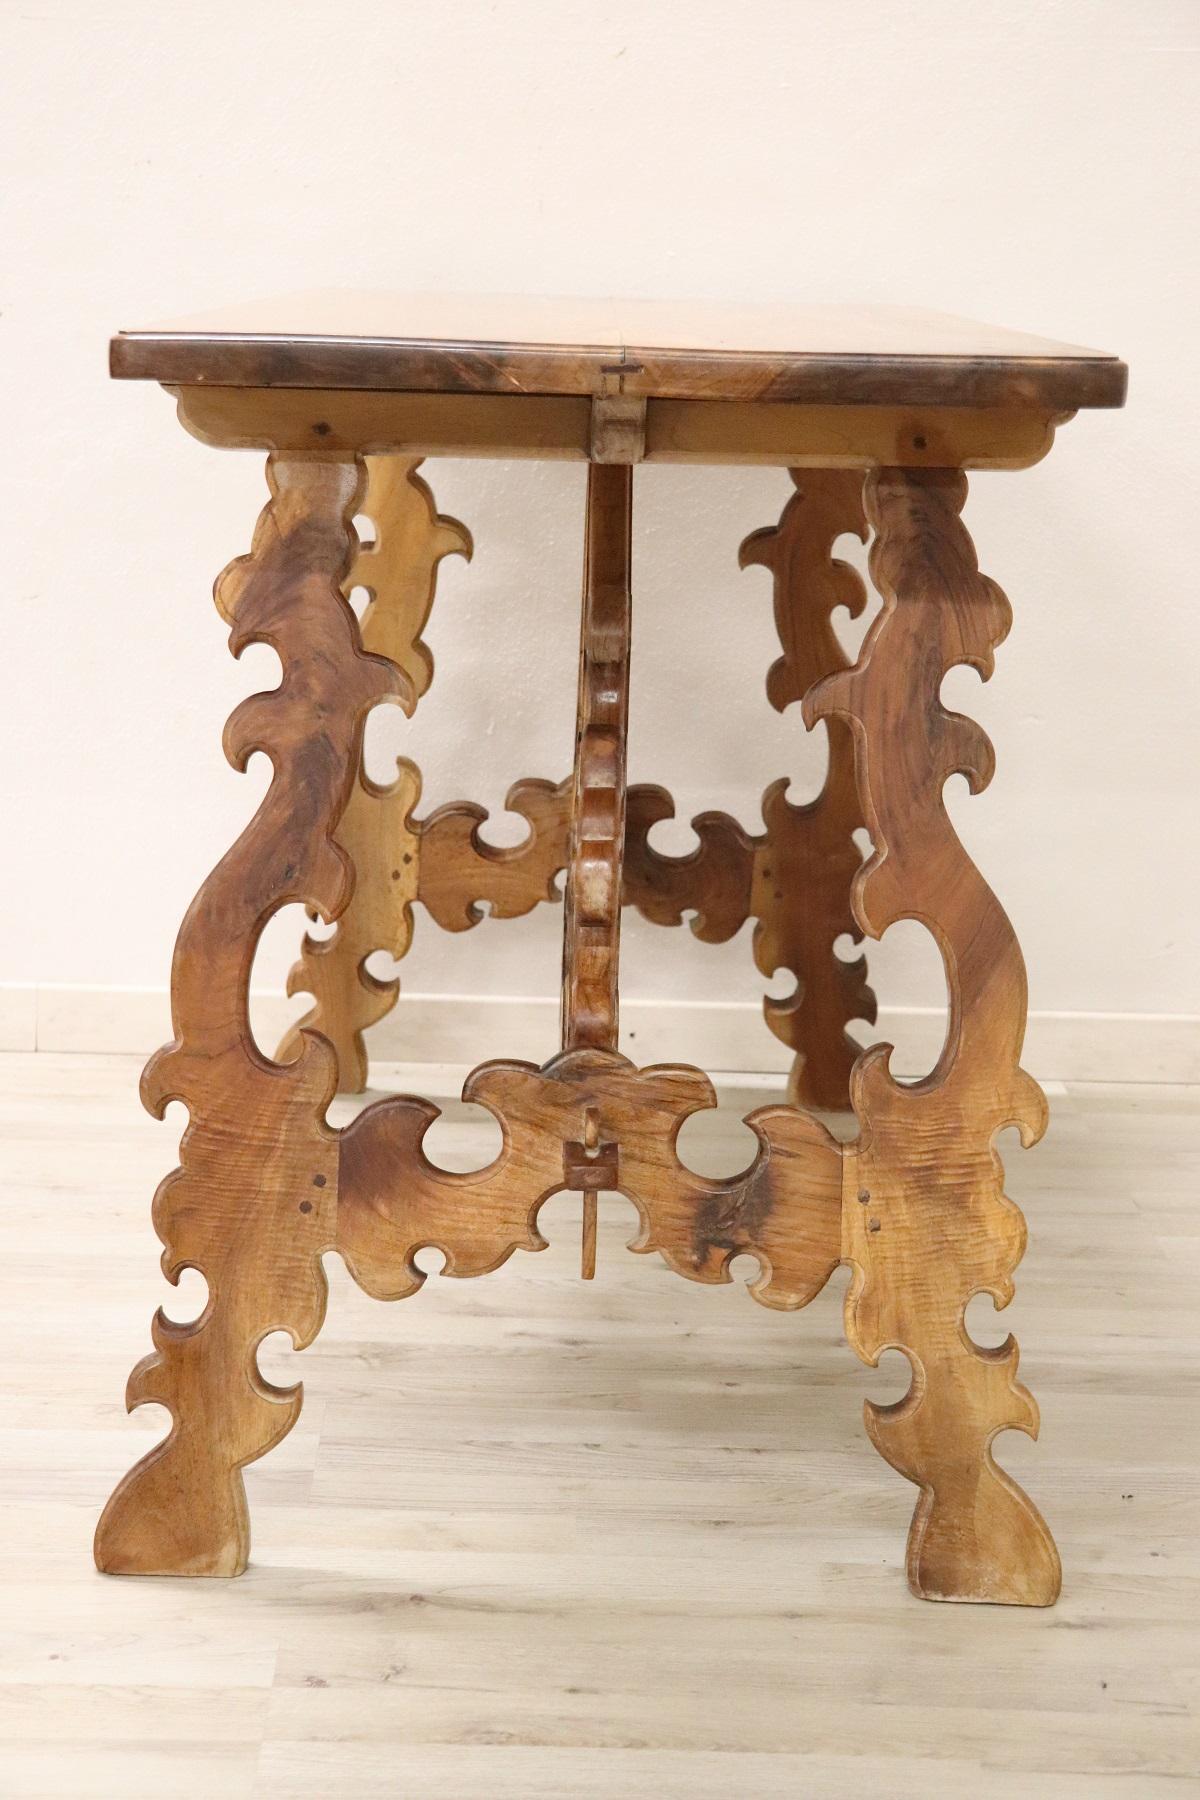 Carved 19th Century Italian Renaissance Style Walnut Desk or Side Table with Lyre Legs